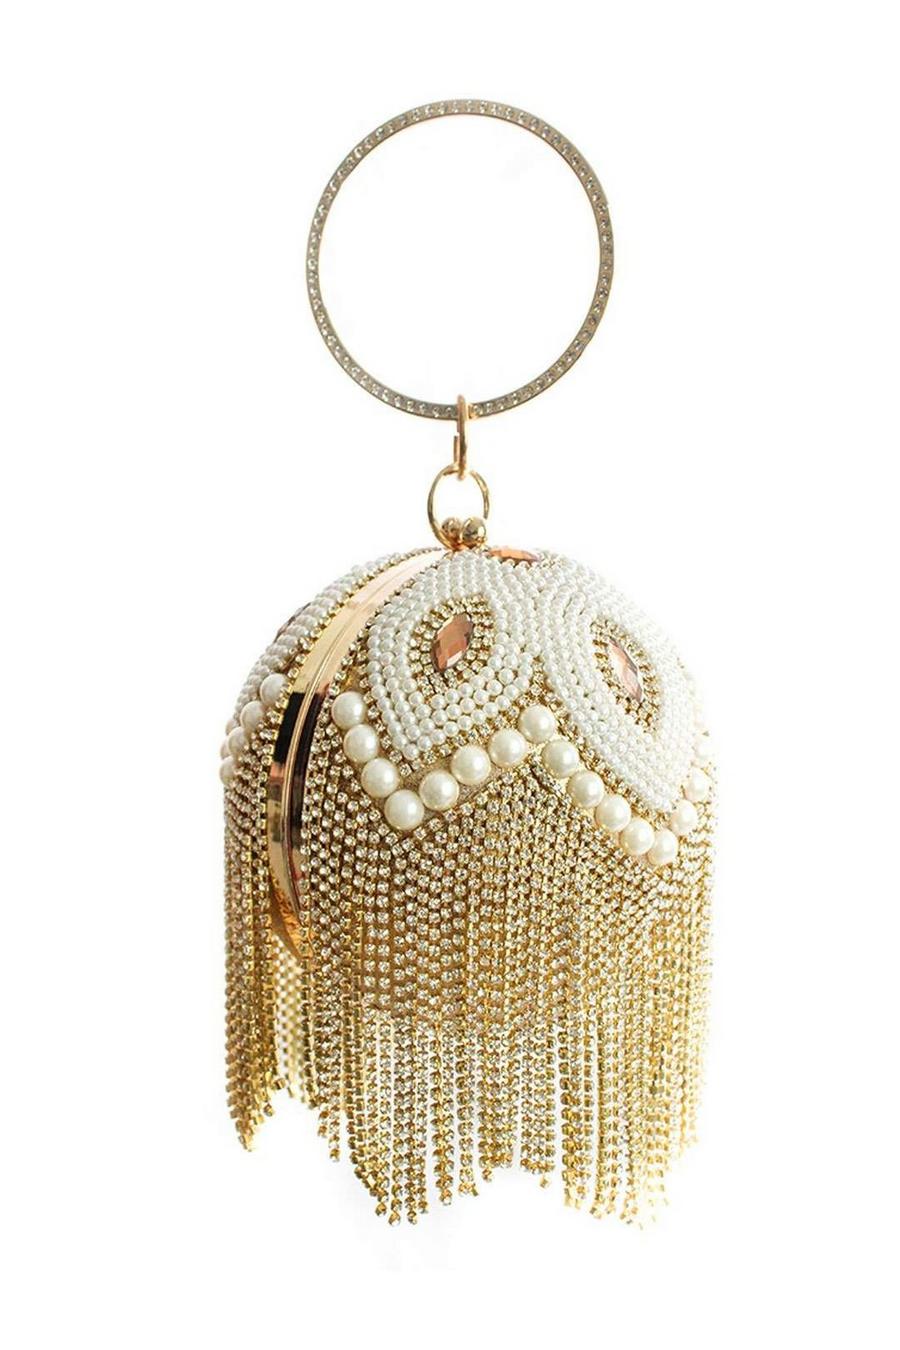 Gold Floral Pattern Pearl Studded Ball Shape Evening Clutch Bag